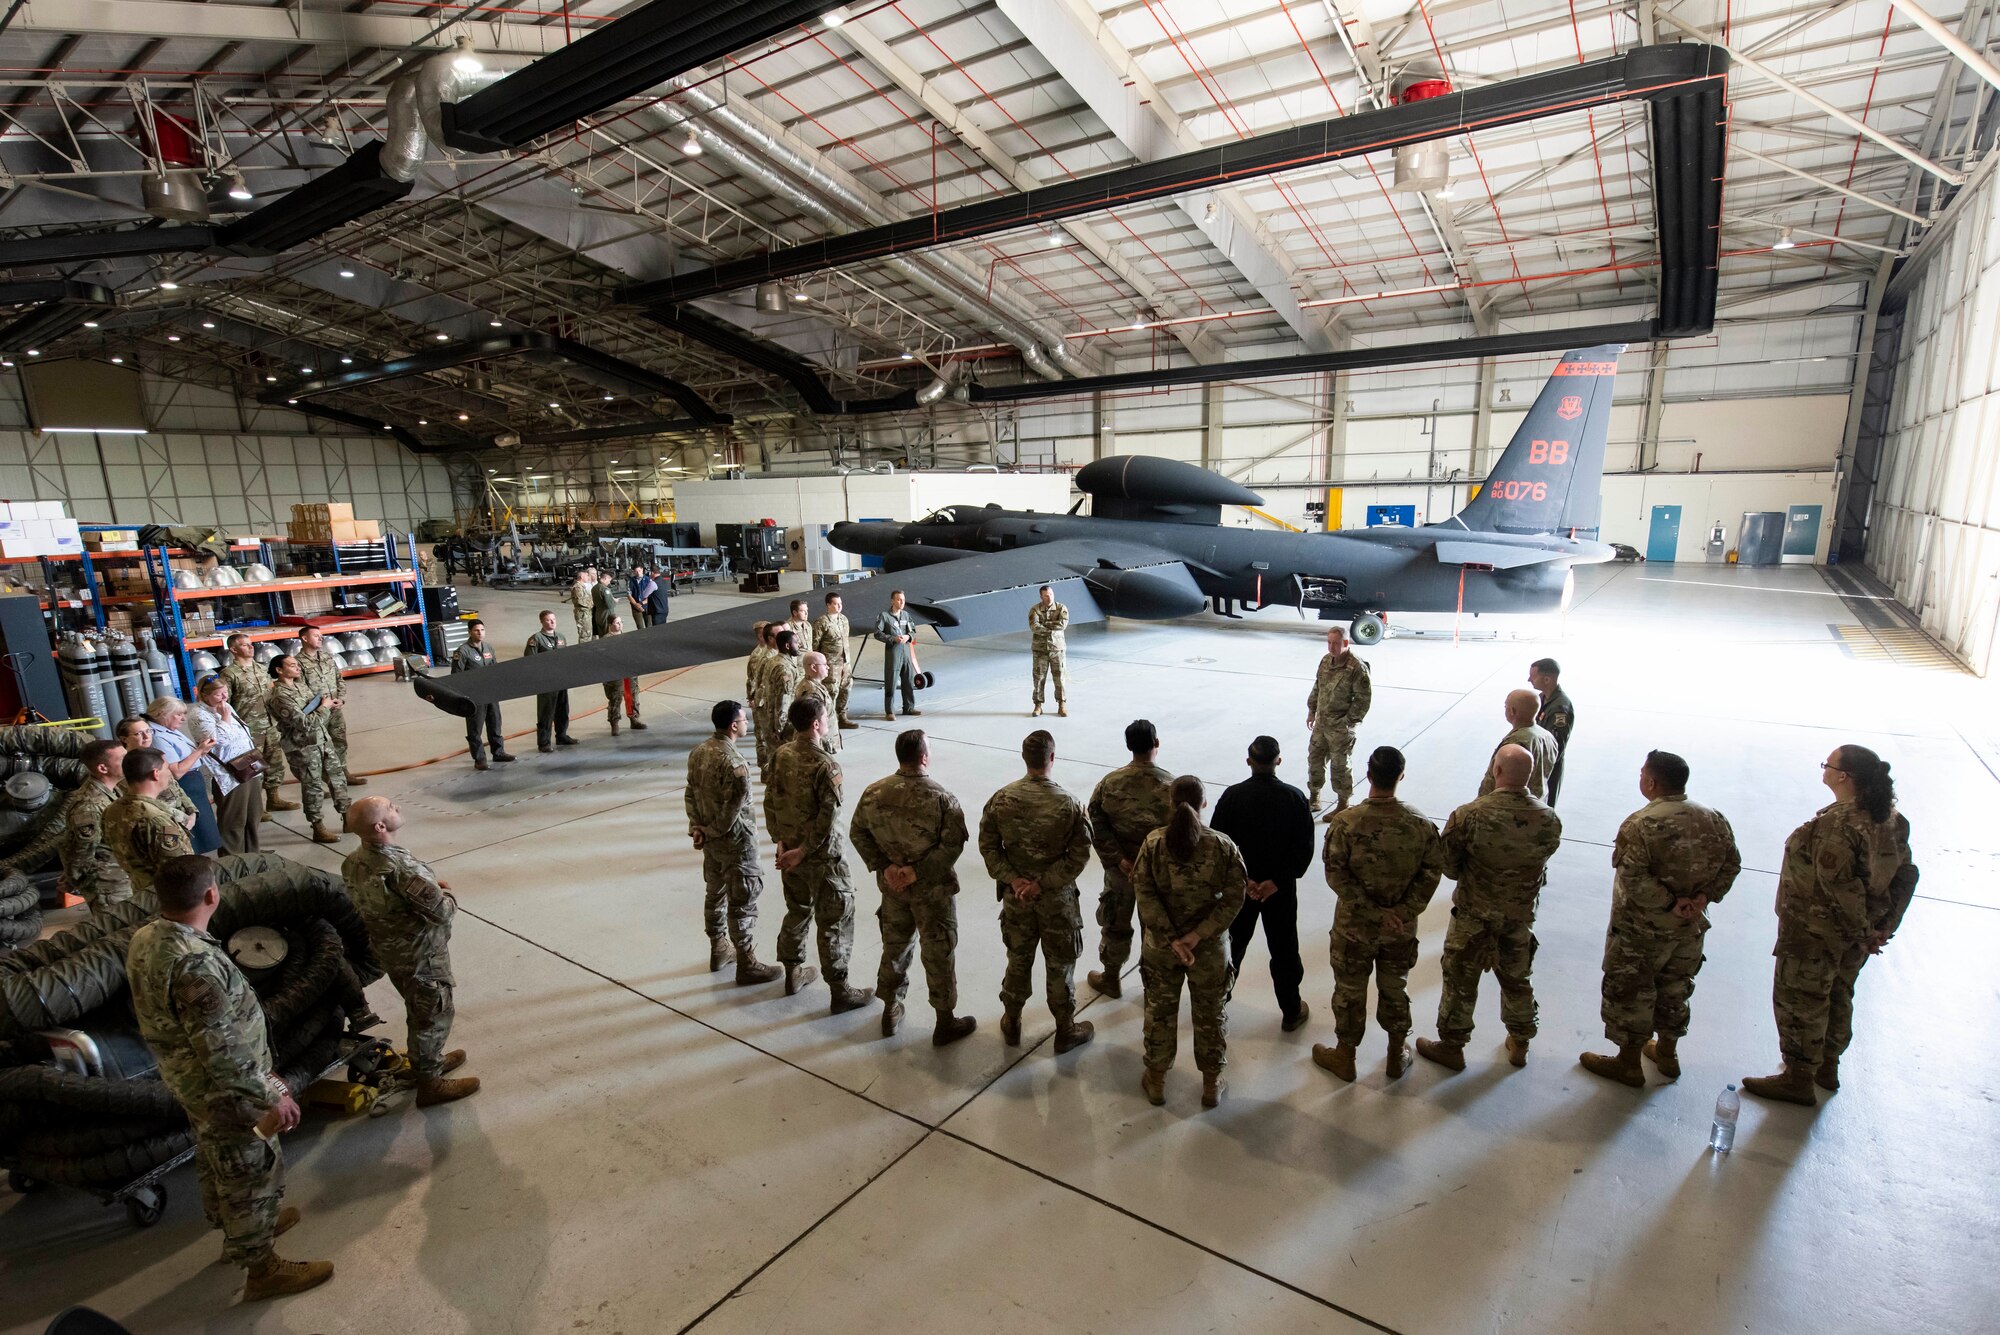 U.S. Air Force Gen. James B. Hecker, center, U.S. Air Forces in Europe and Air Forces Africa commander, talks with Airmen of the 99th Expeditionary Reconnaissance Squadron in front of a U-2 Dragon Lady, at Royal Air Force Fairford, England, July, 18, 2022. During his first visit to the 501st Combat Support Wing as the USAFE-AFAFRICA commander, Hecker met with several Airmen and received briefings about the wing’s mission and capabilities. (U.S. Air Force photo by Senior Airman Jennifer Zima)